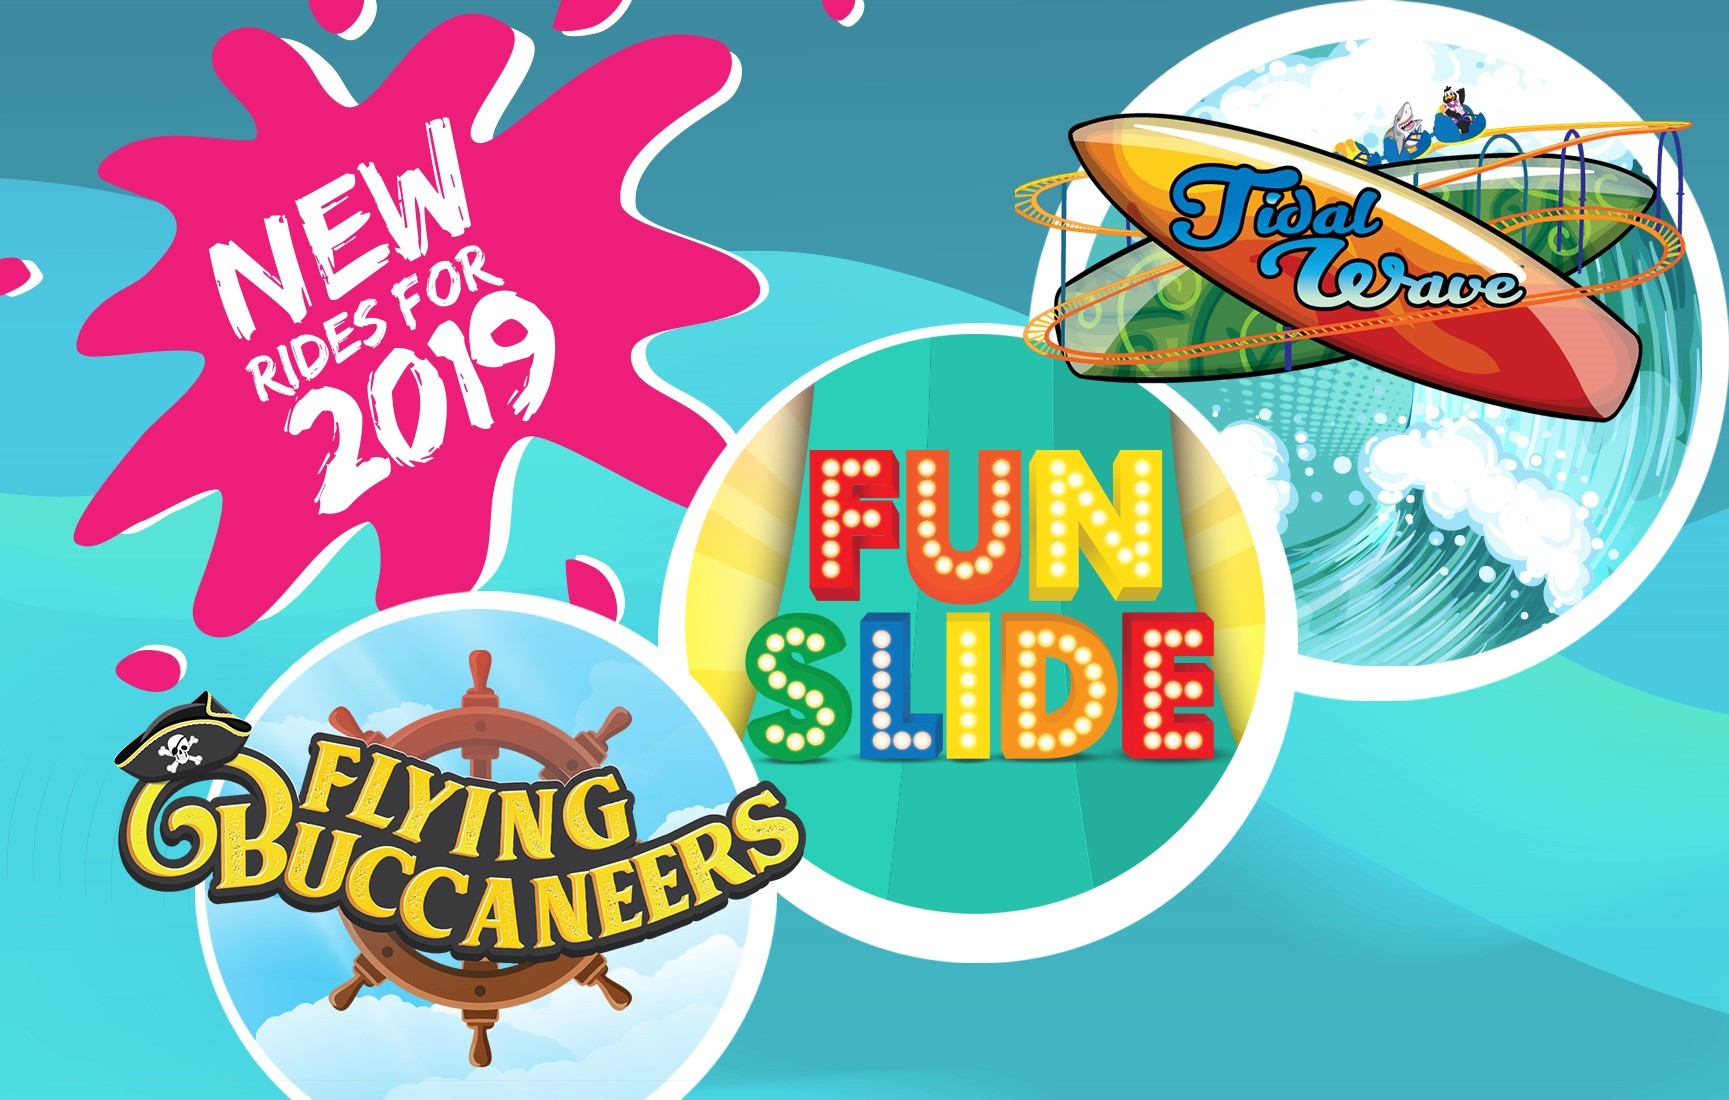 New rides coming to Jenkinson's Boardwalk in 2019!